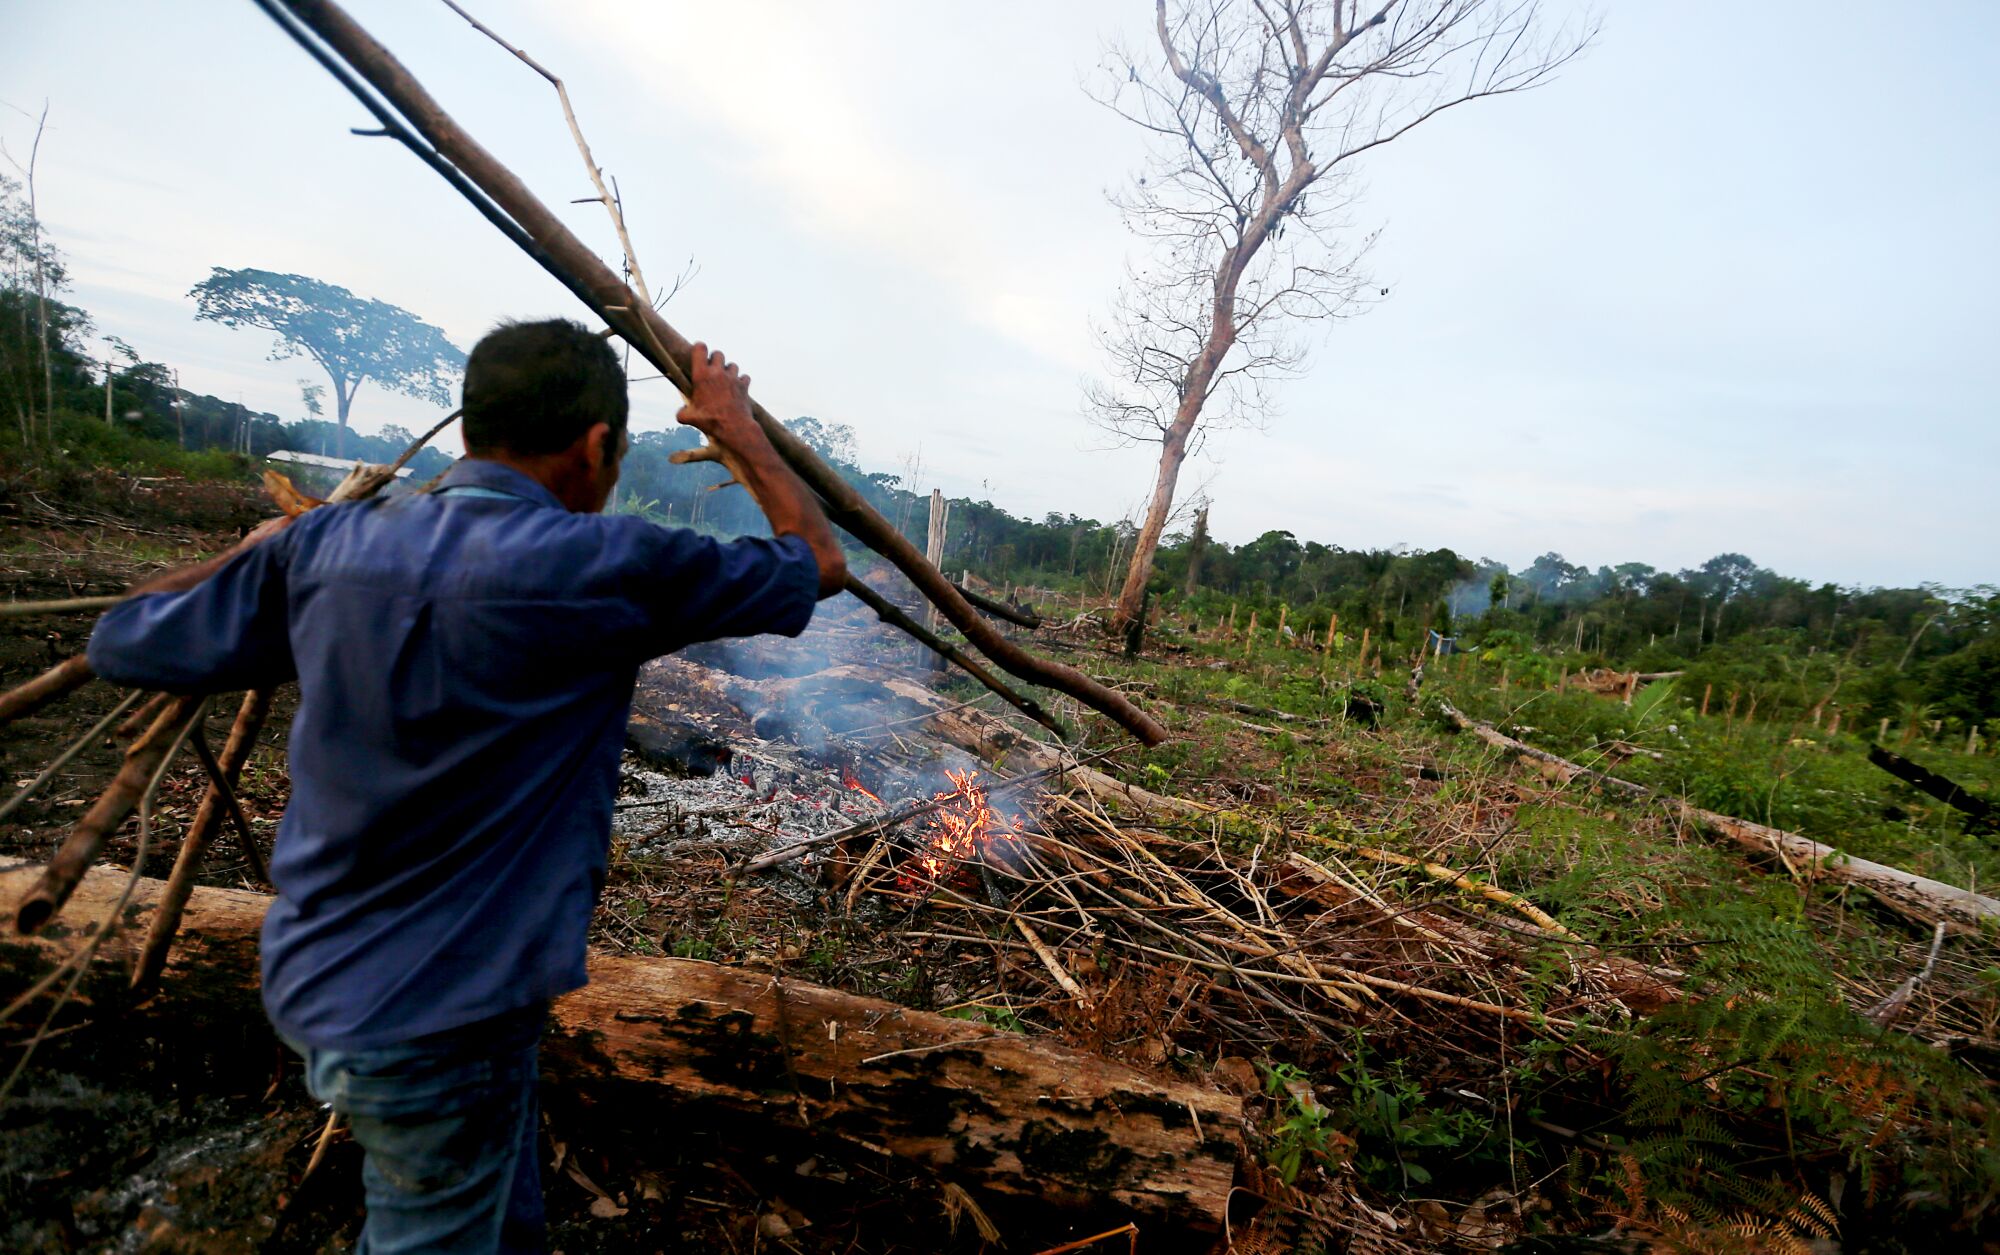 A settler slashes and burns a patch of land near the edge of the rainforest